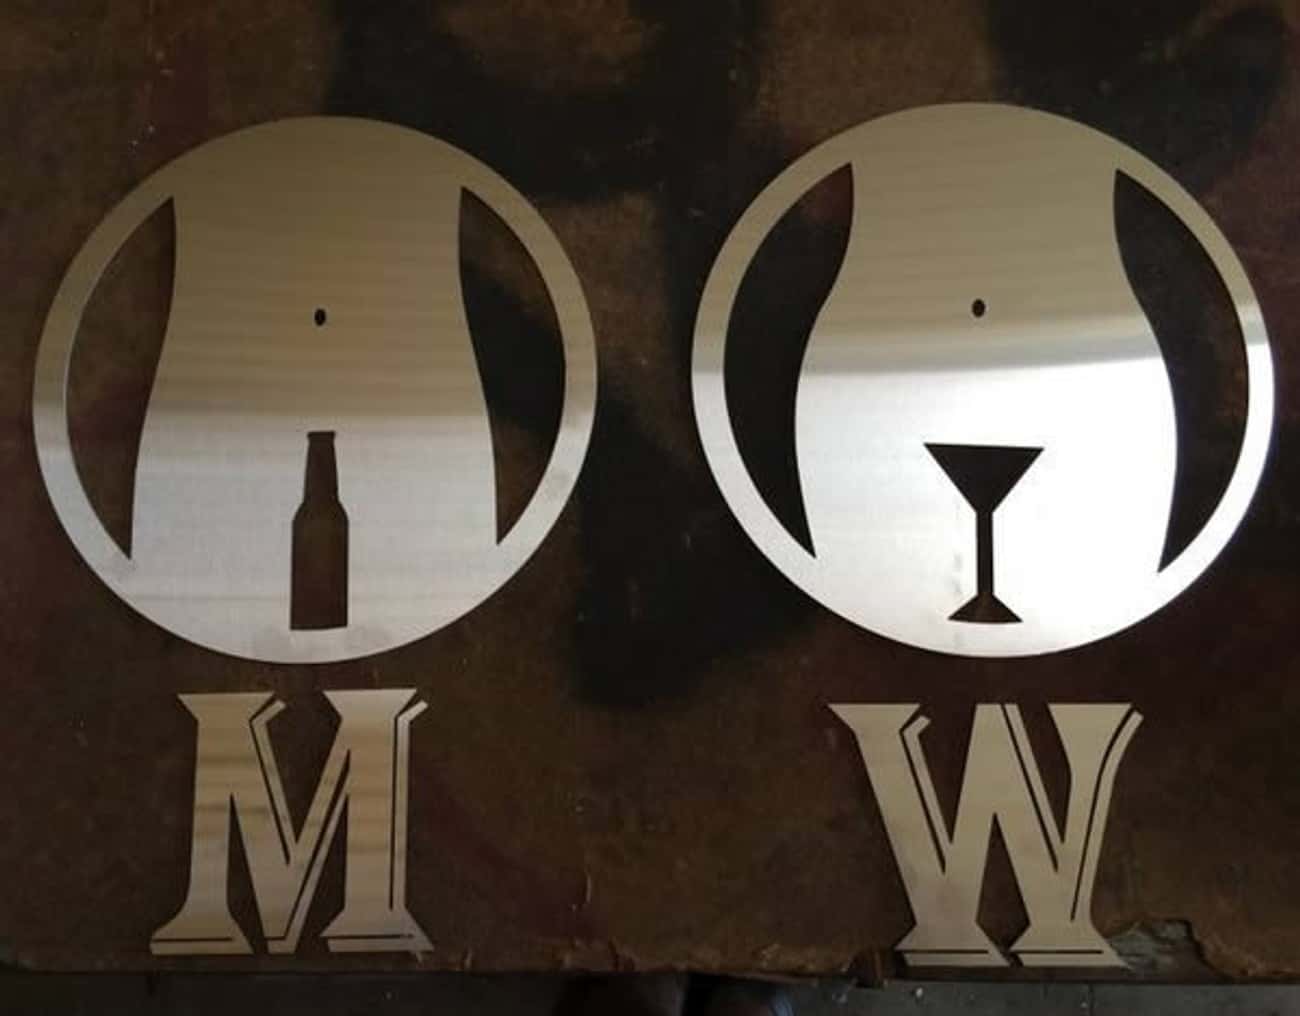 This Clever Sign May Explain Why Men Love Beer and Women Love Cosmos